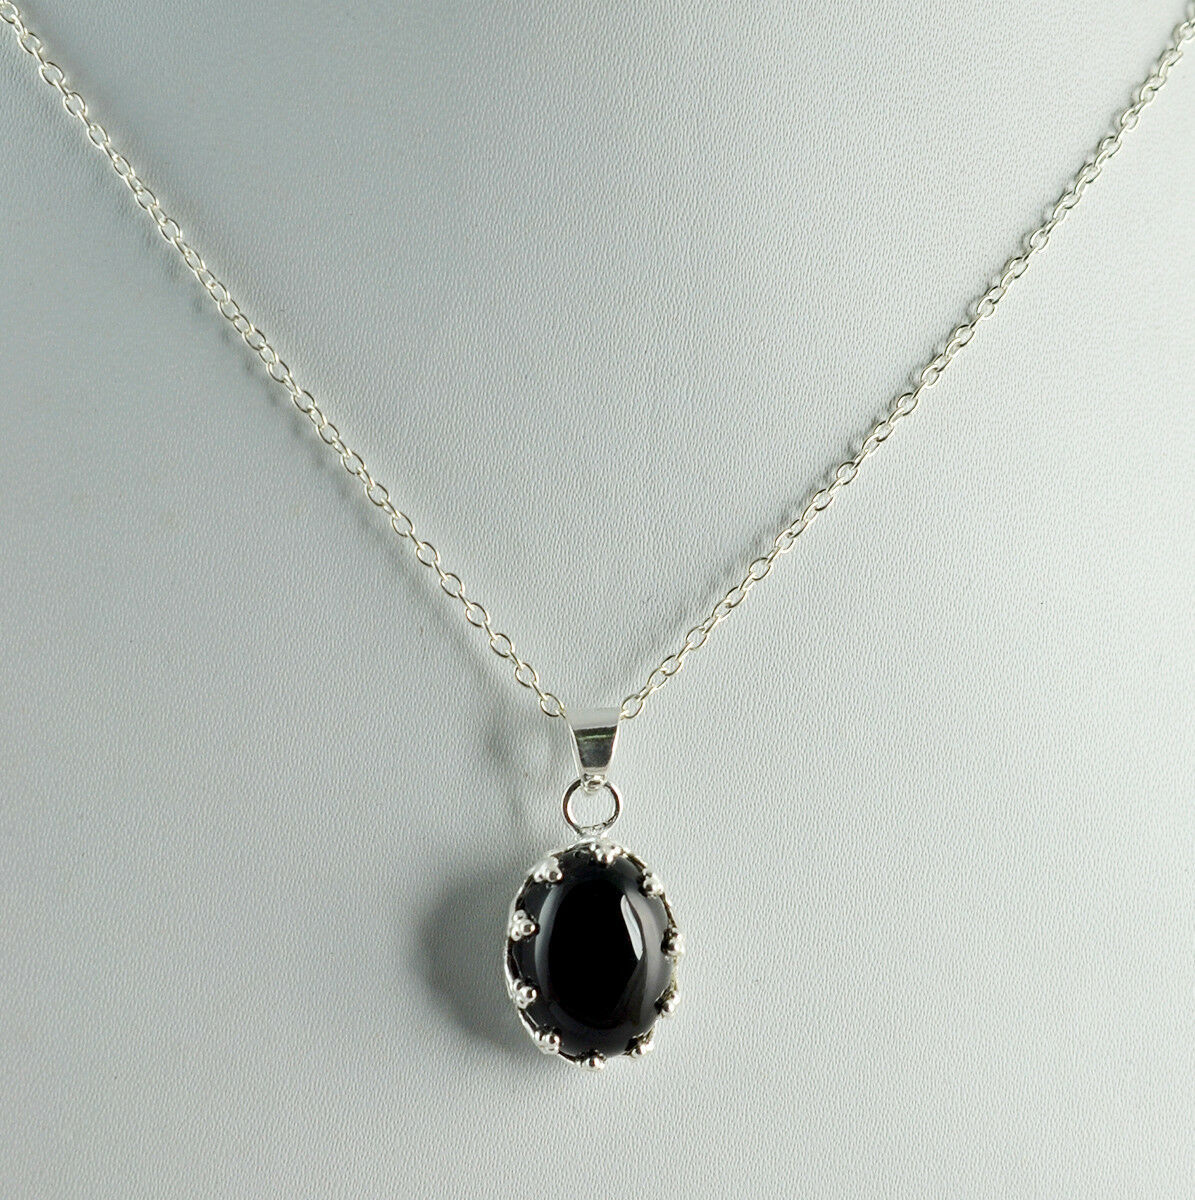 Black Onyx 925 Solid Sterling Silver Handmade Pendant Chain Necklace for Women